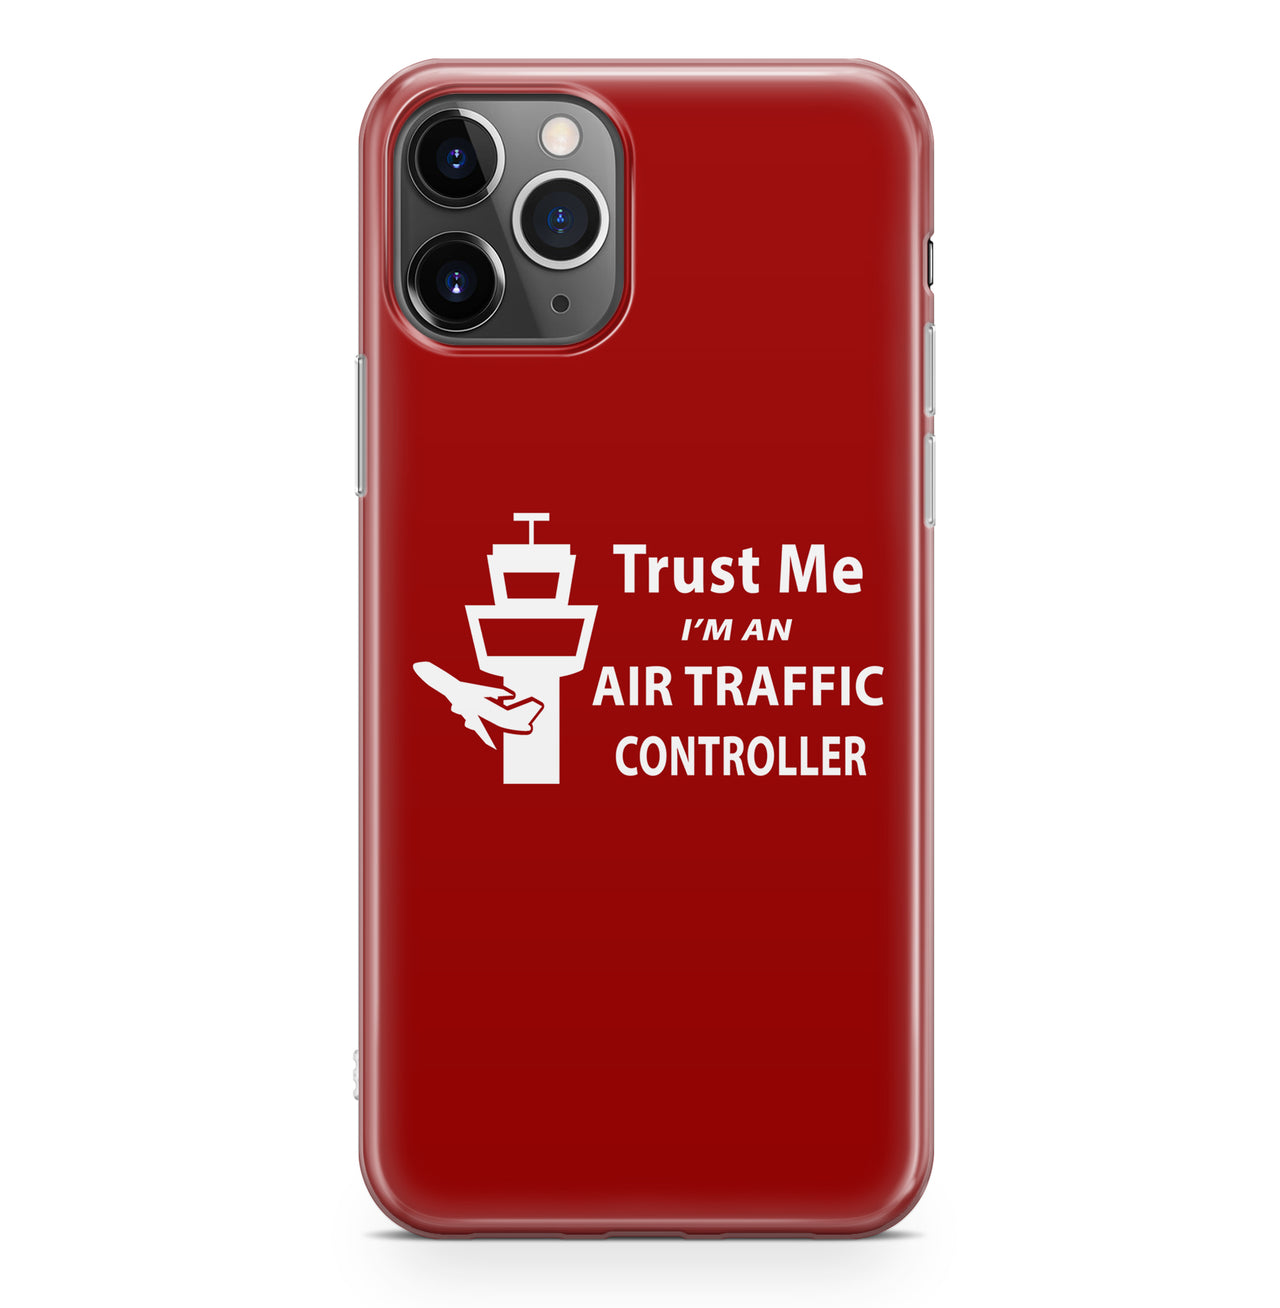 Trust Me I'm an Air Traffic Controller Designed iPhone Cases